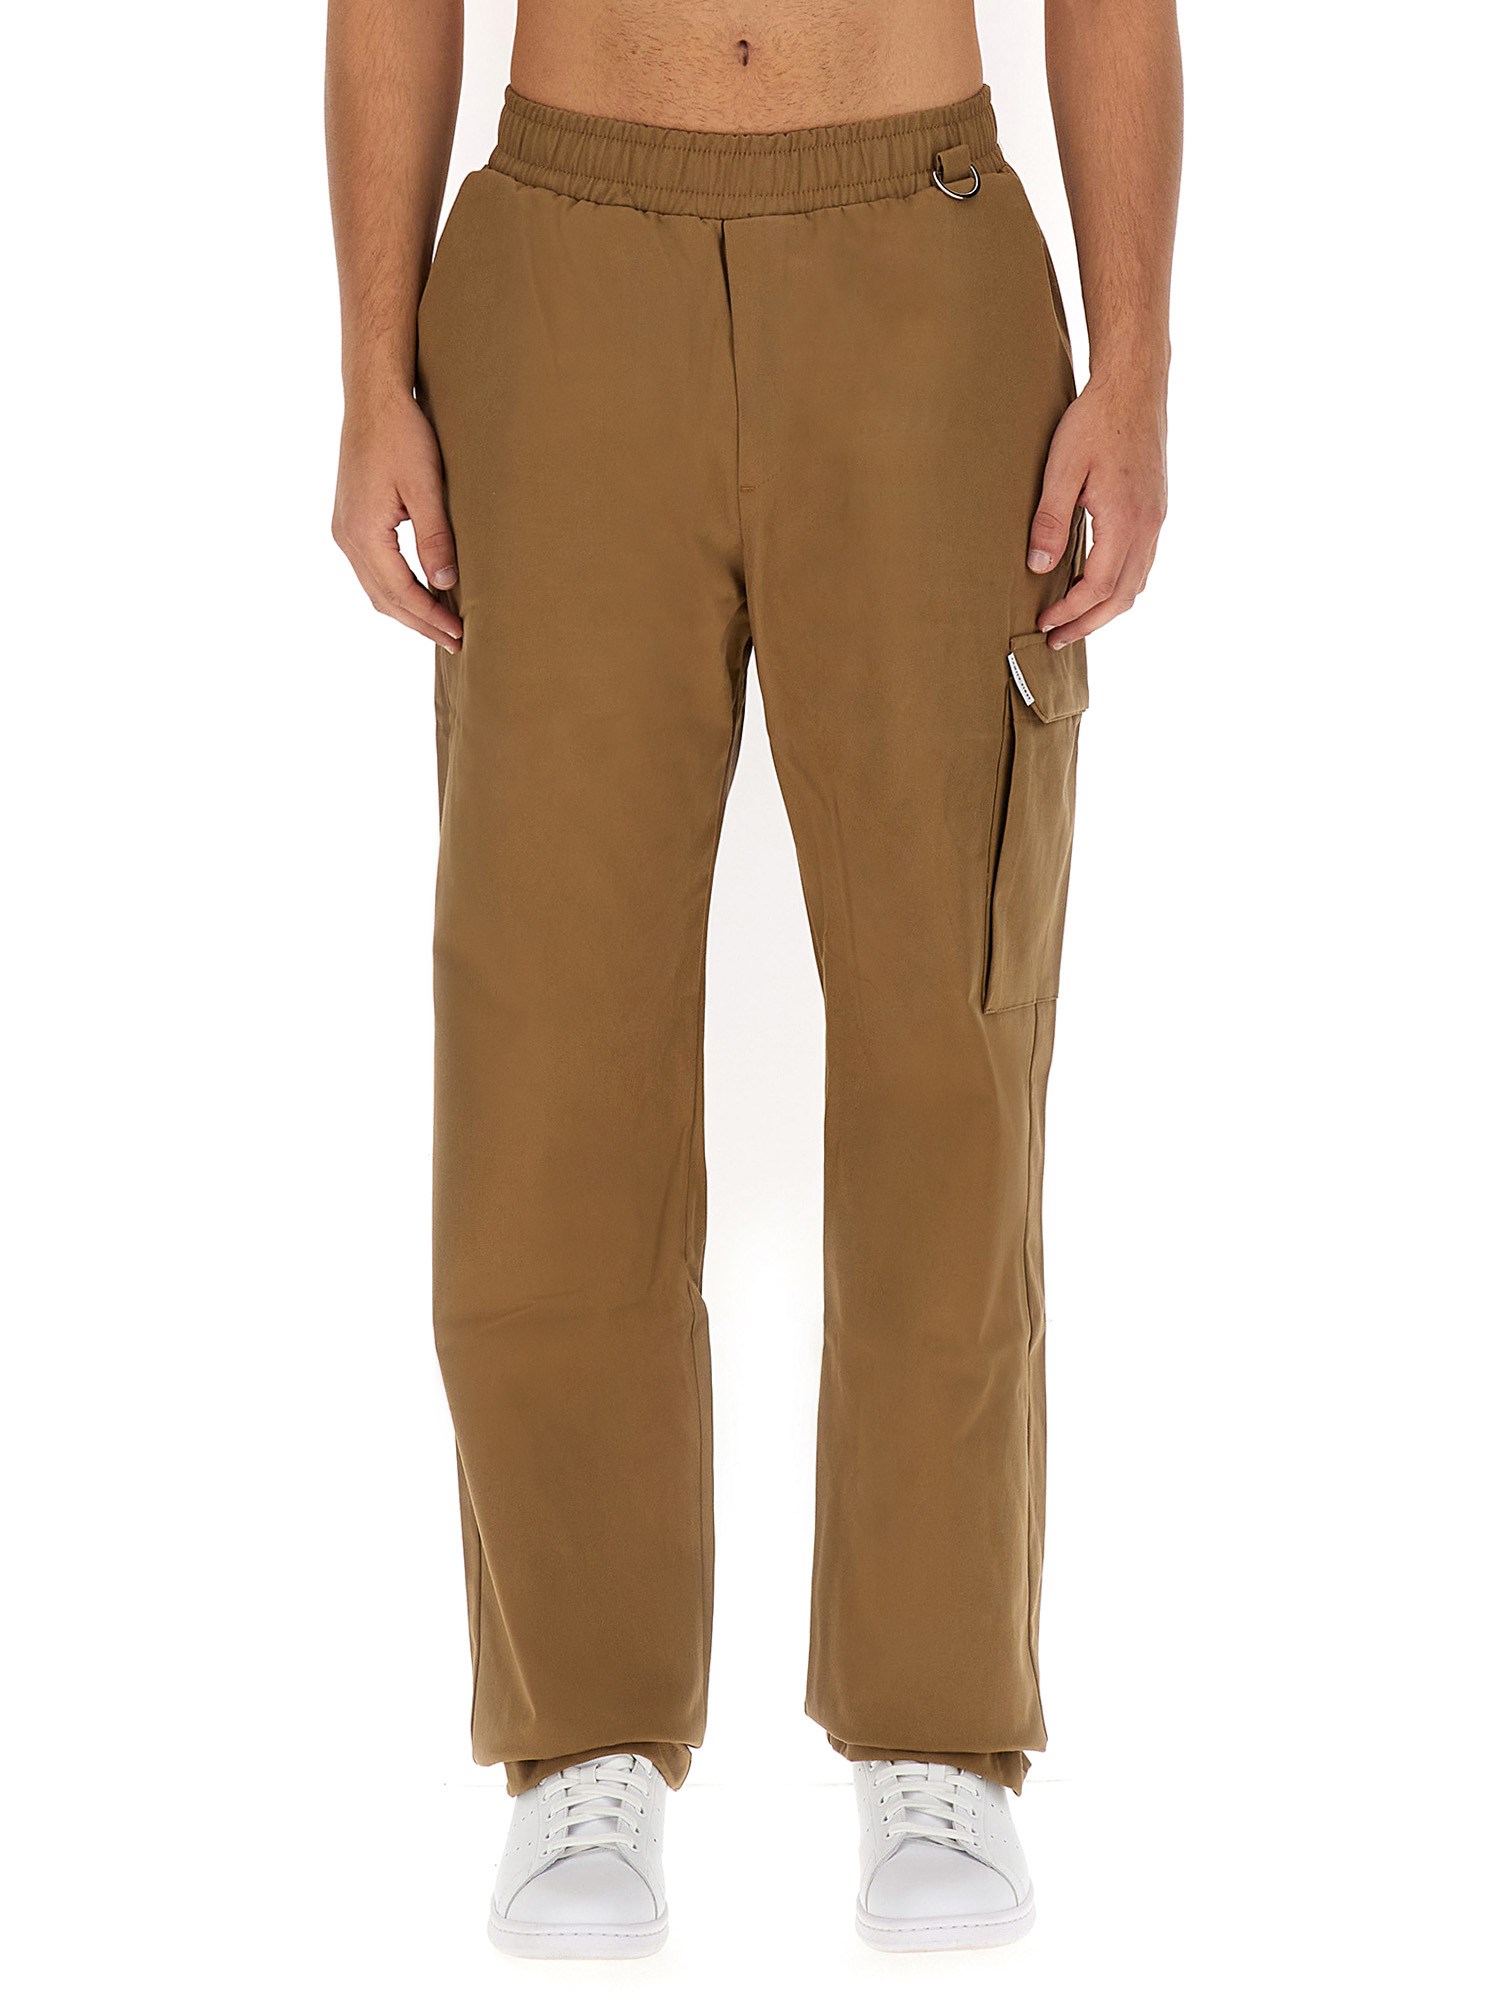 Family First family first cargo pants